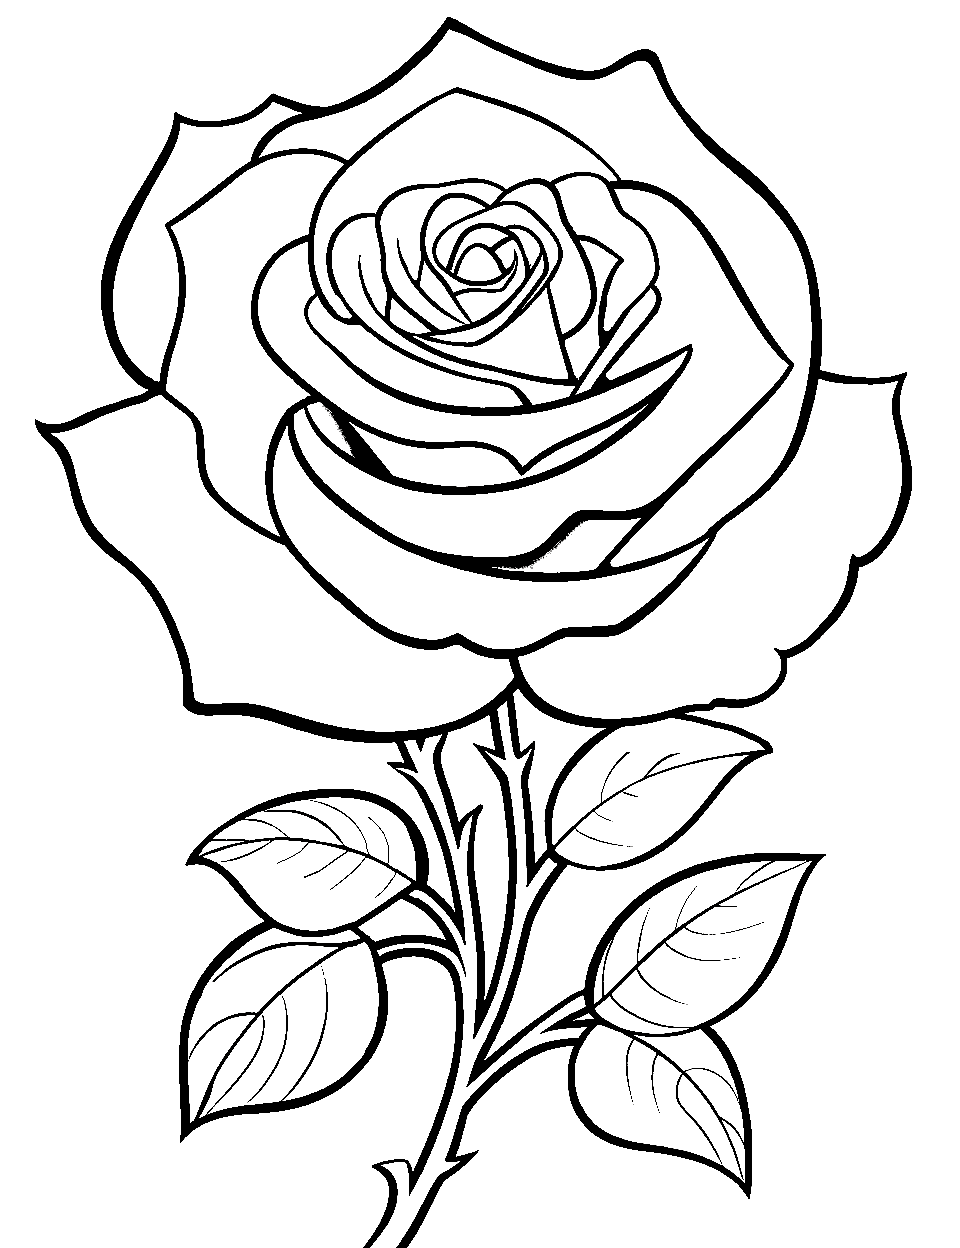 Realistic Rose Detail Coloring Page - A highly detailed close-up of a rose.